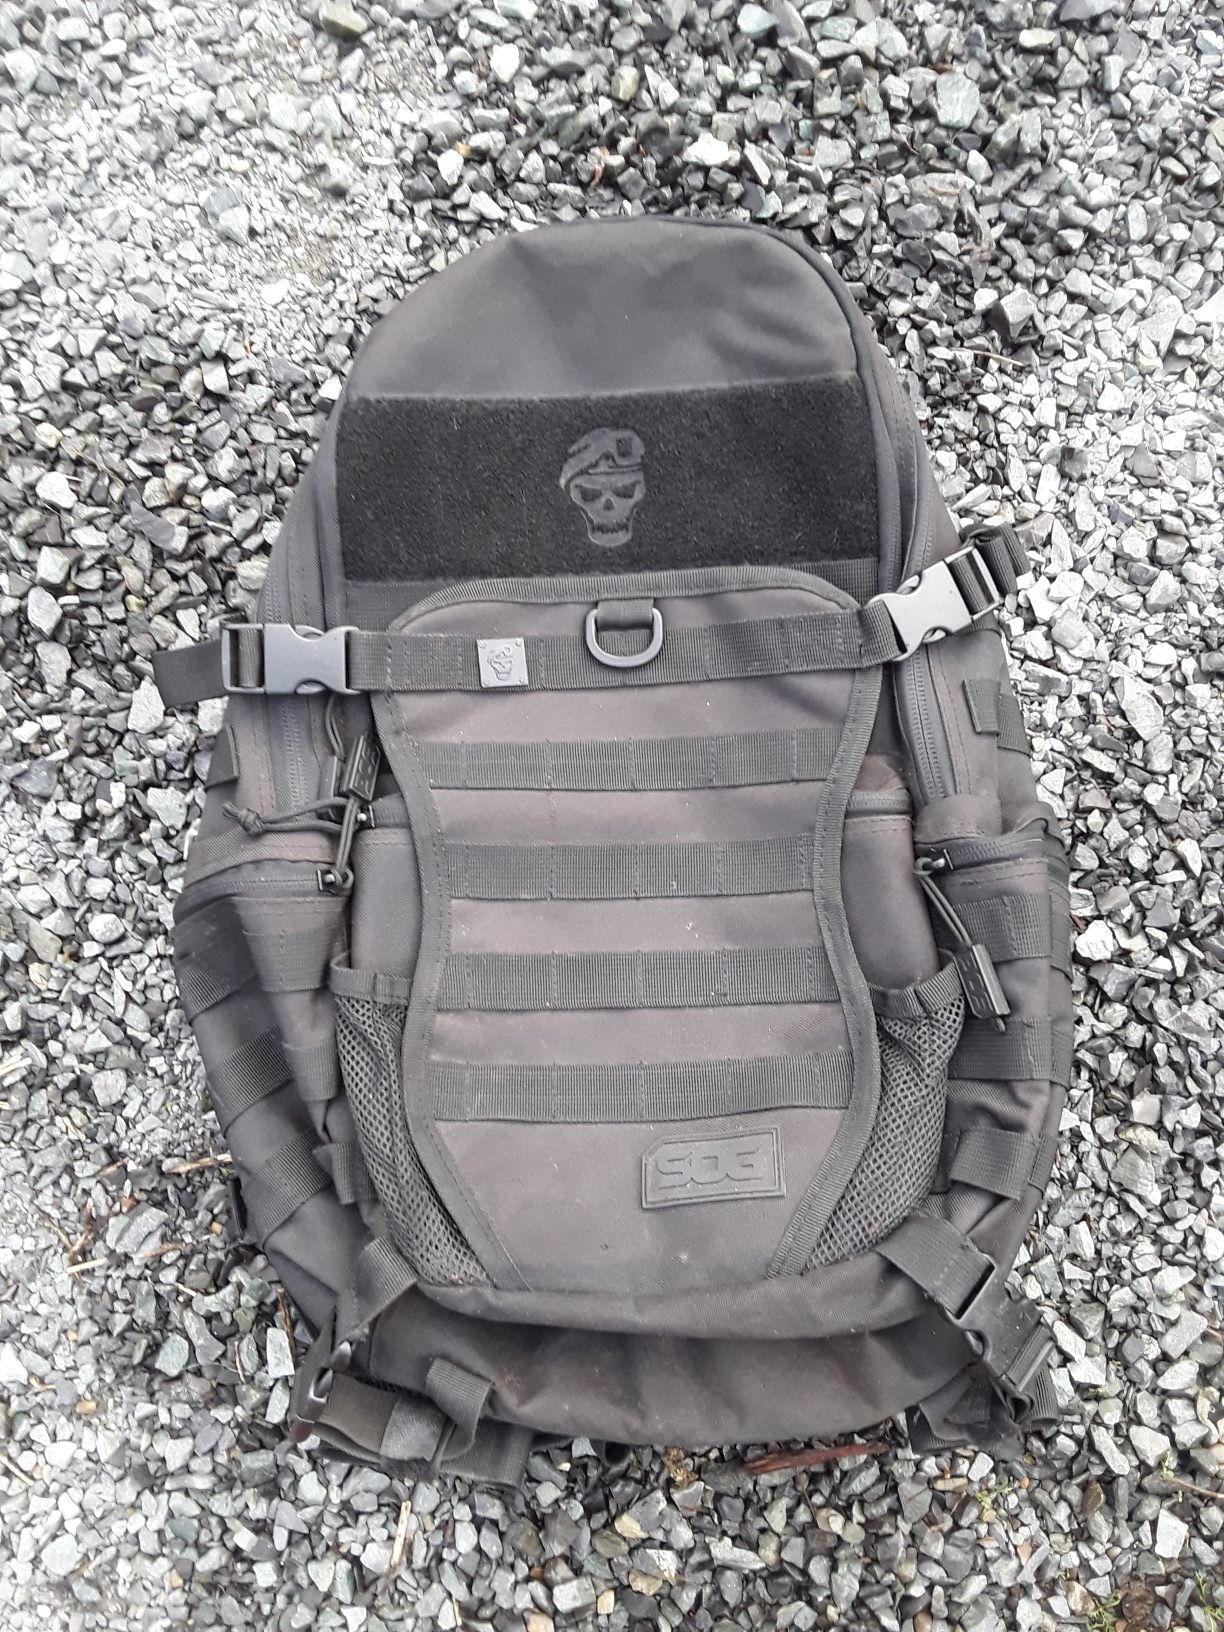 39.1-Liter Storage SOG Opord Tactical Day Pack